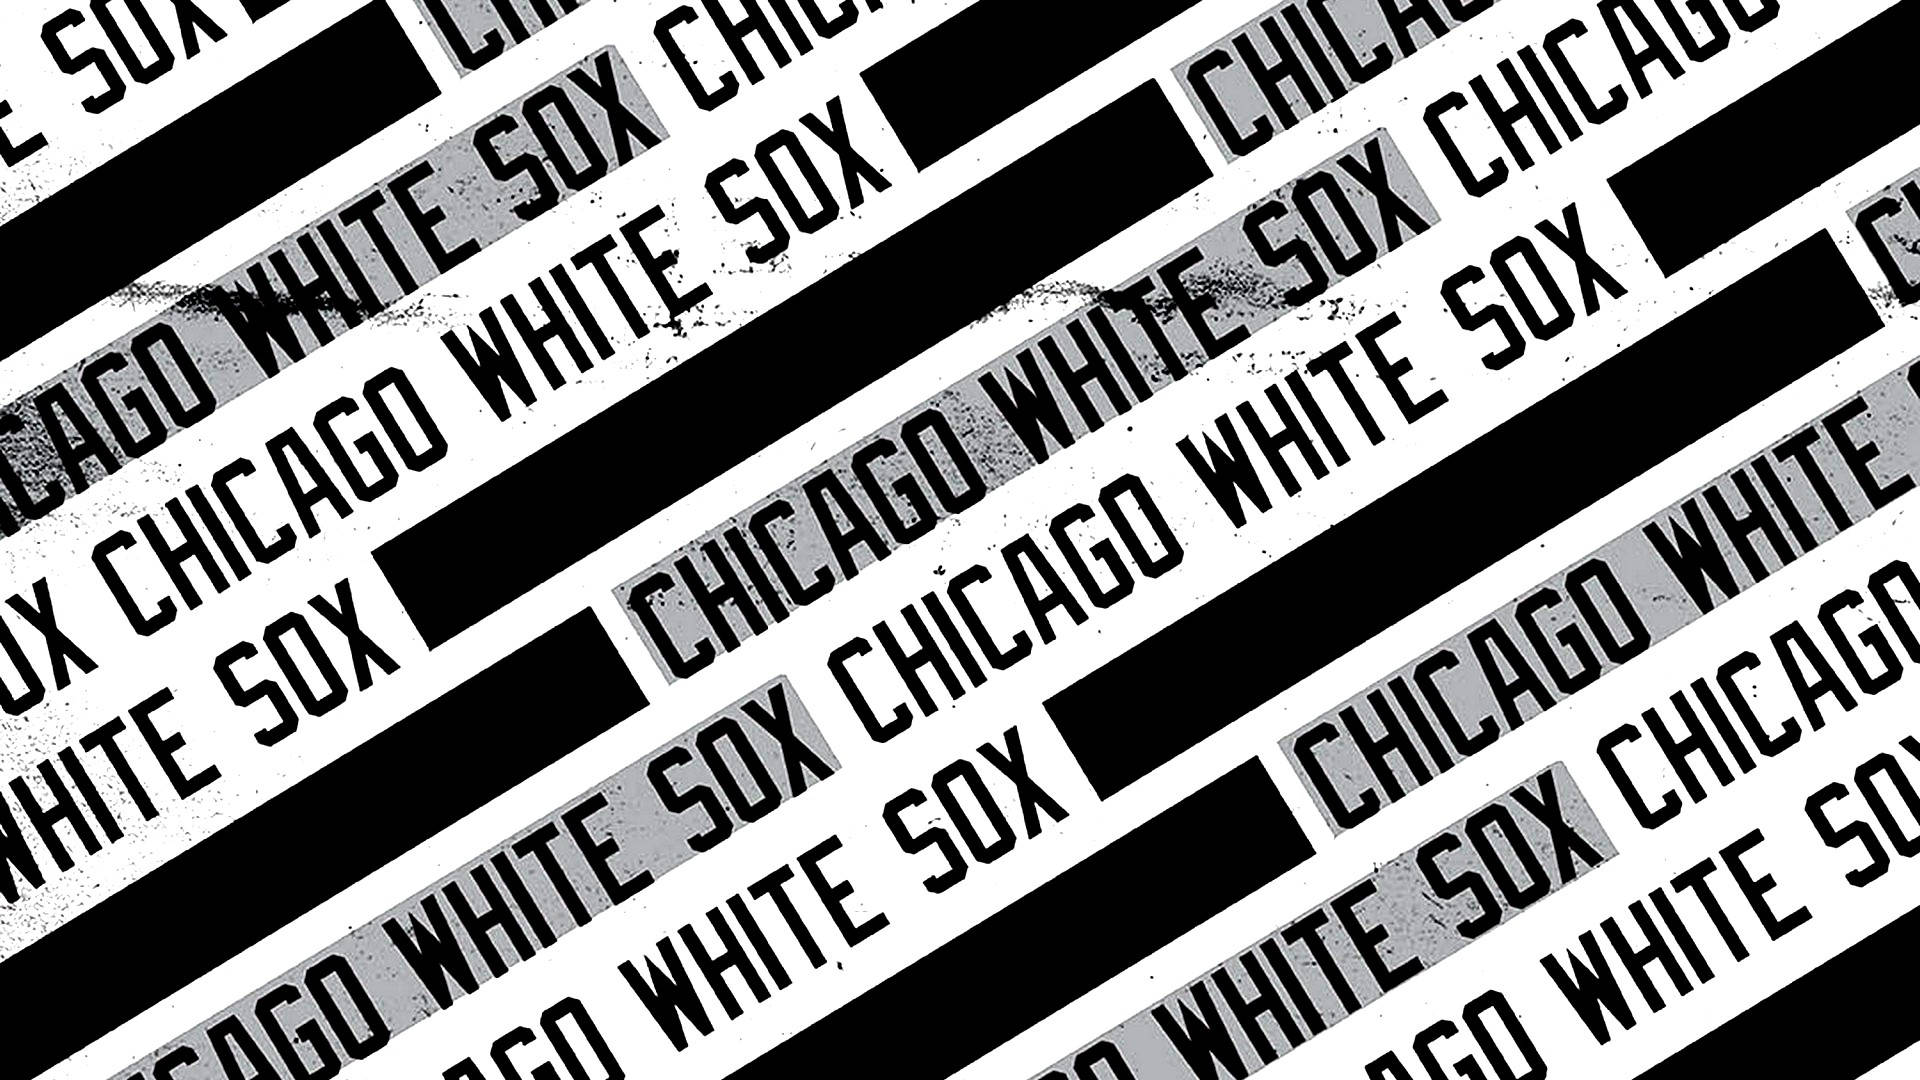 1920X1080 Chicago White Sox Wallpaper and Background